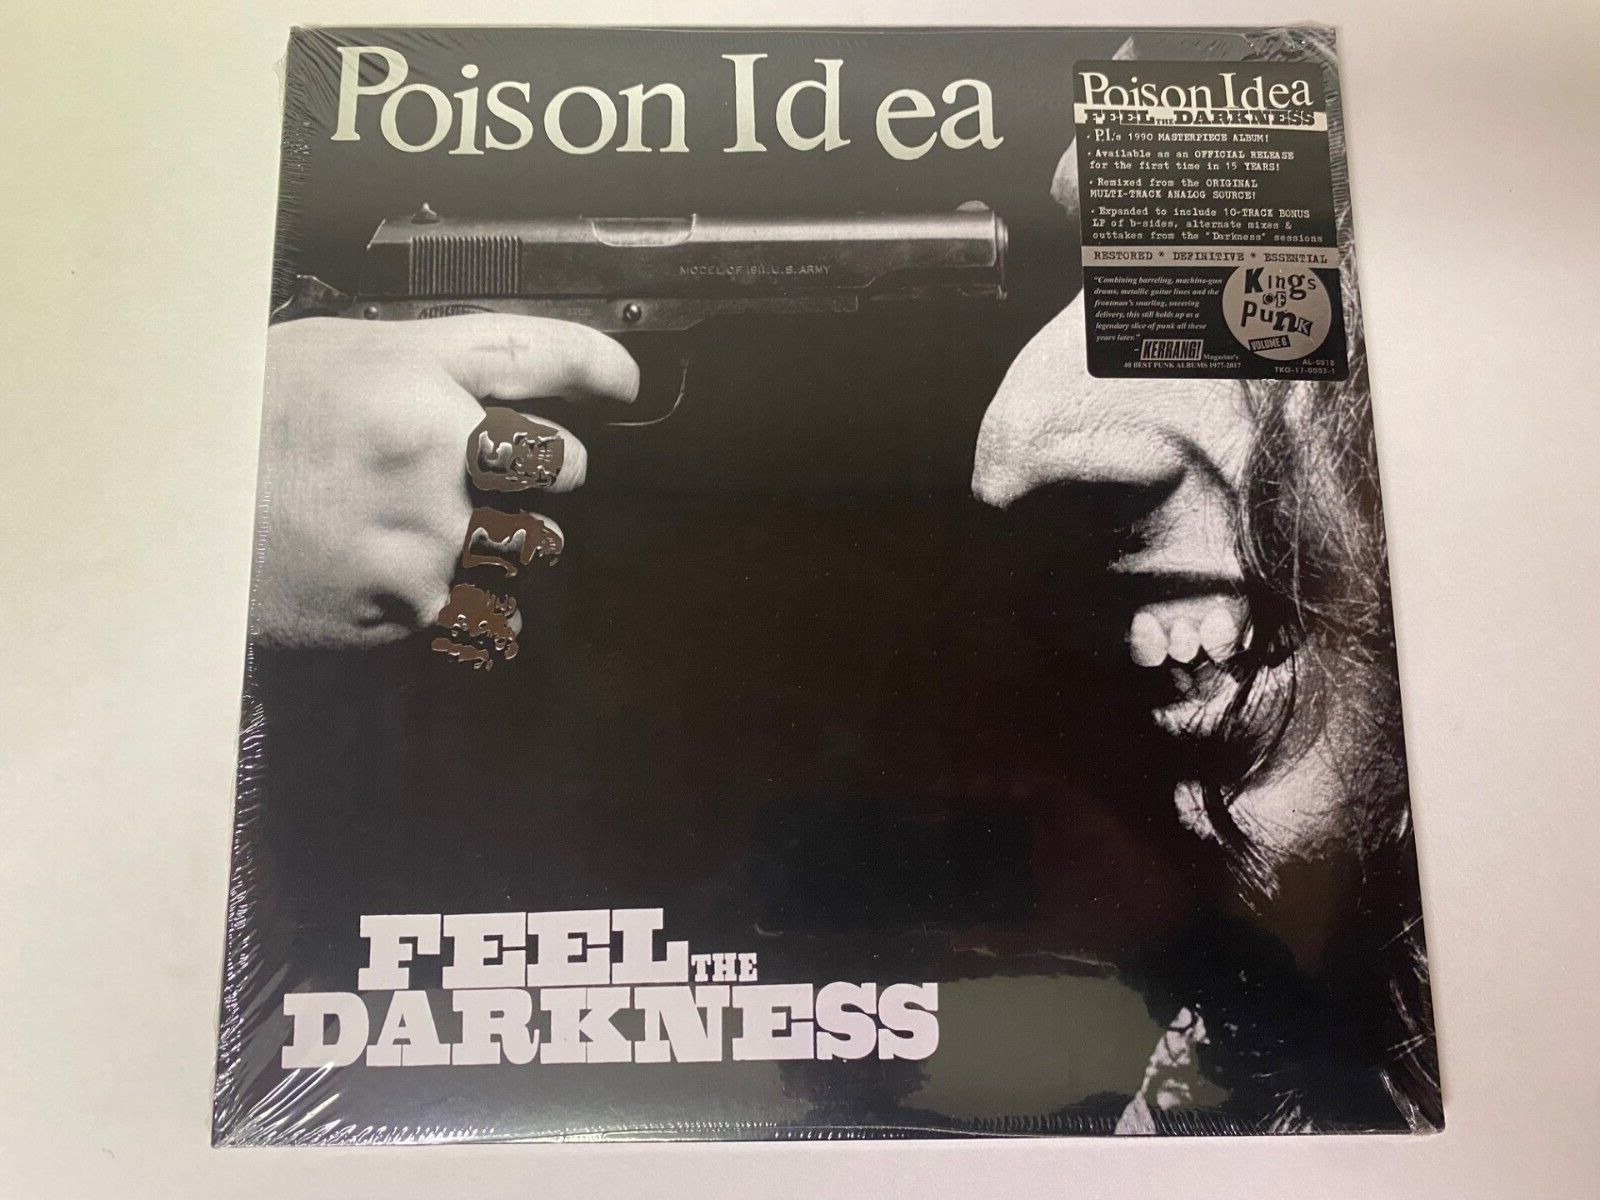 Poison Idea Feel The Darkness 2XLP Vinyl Record REMASTERED NEW SEALED